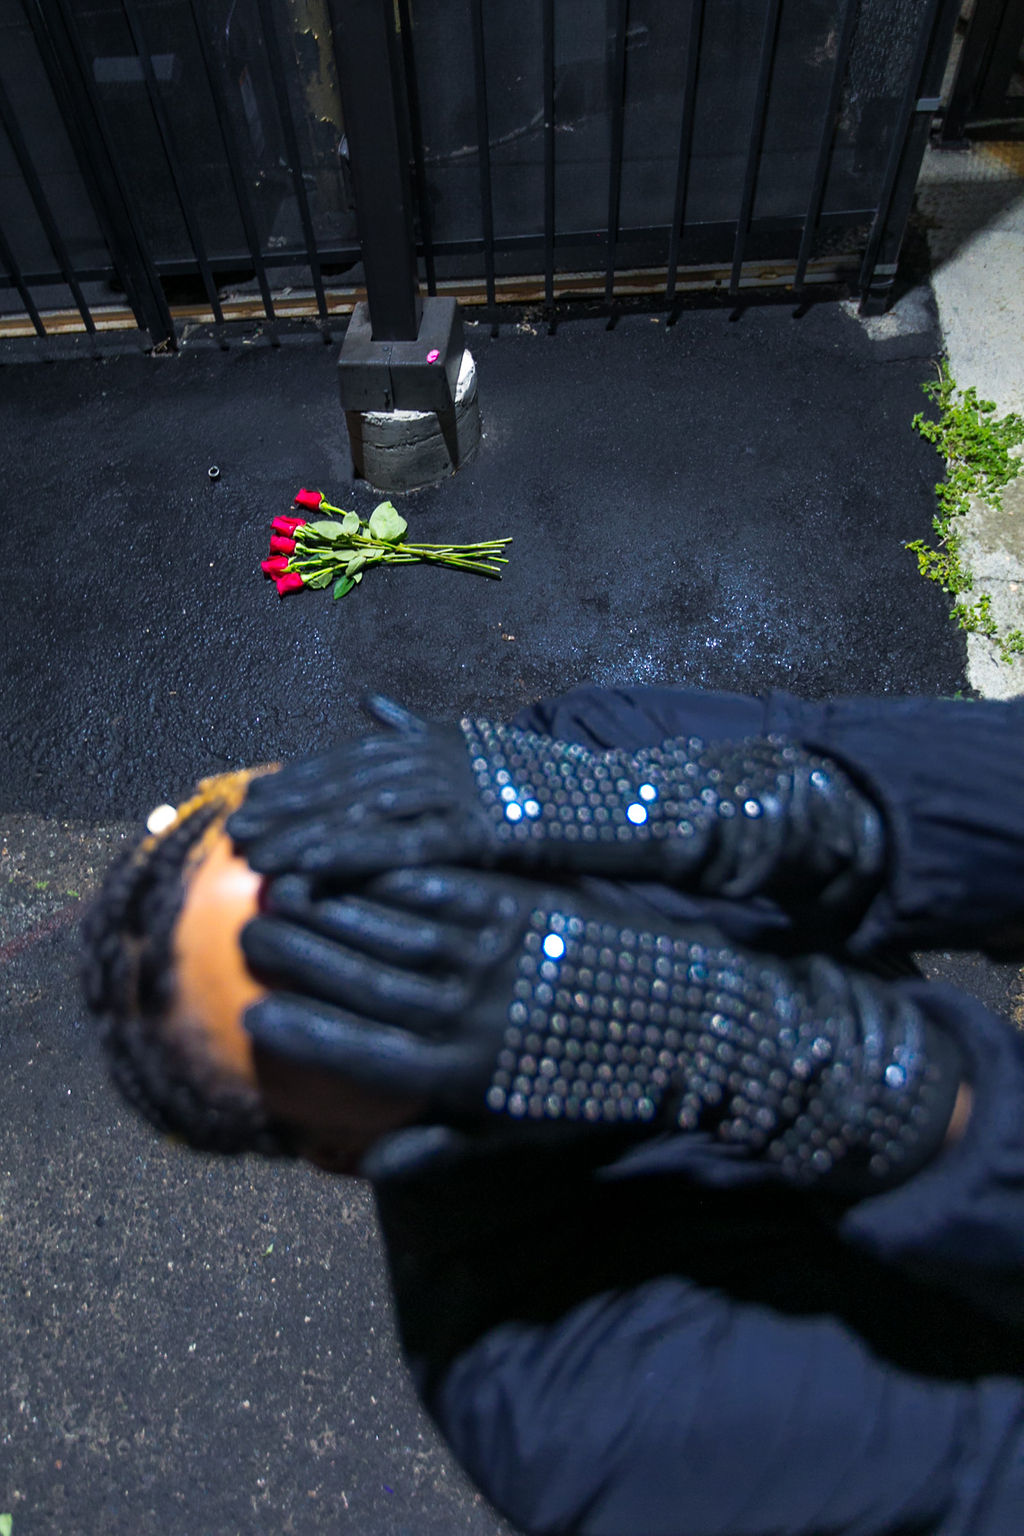 leather gloves-xmmtt-rsee-lcm-social media hiatus-roses-wear who you are